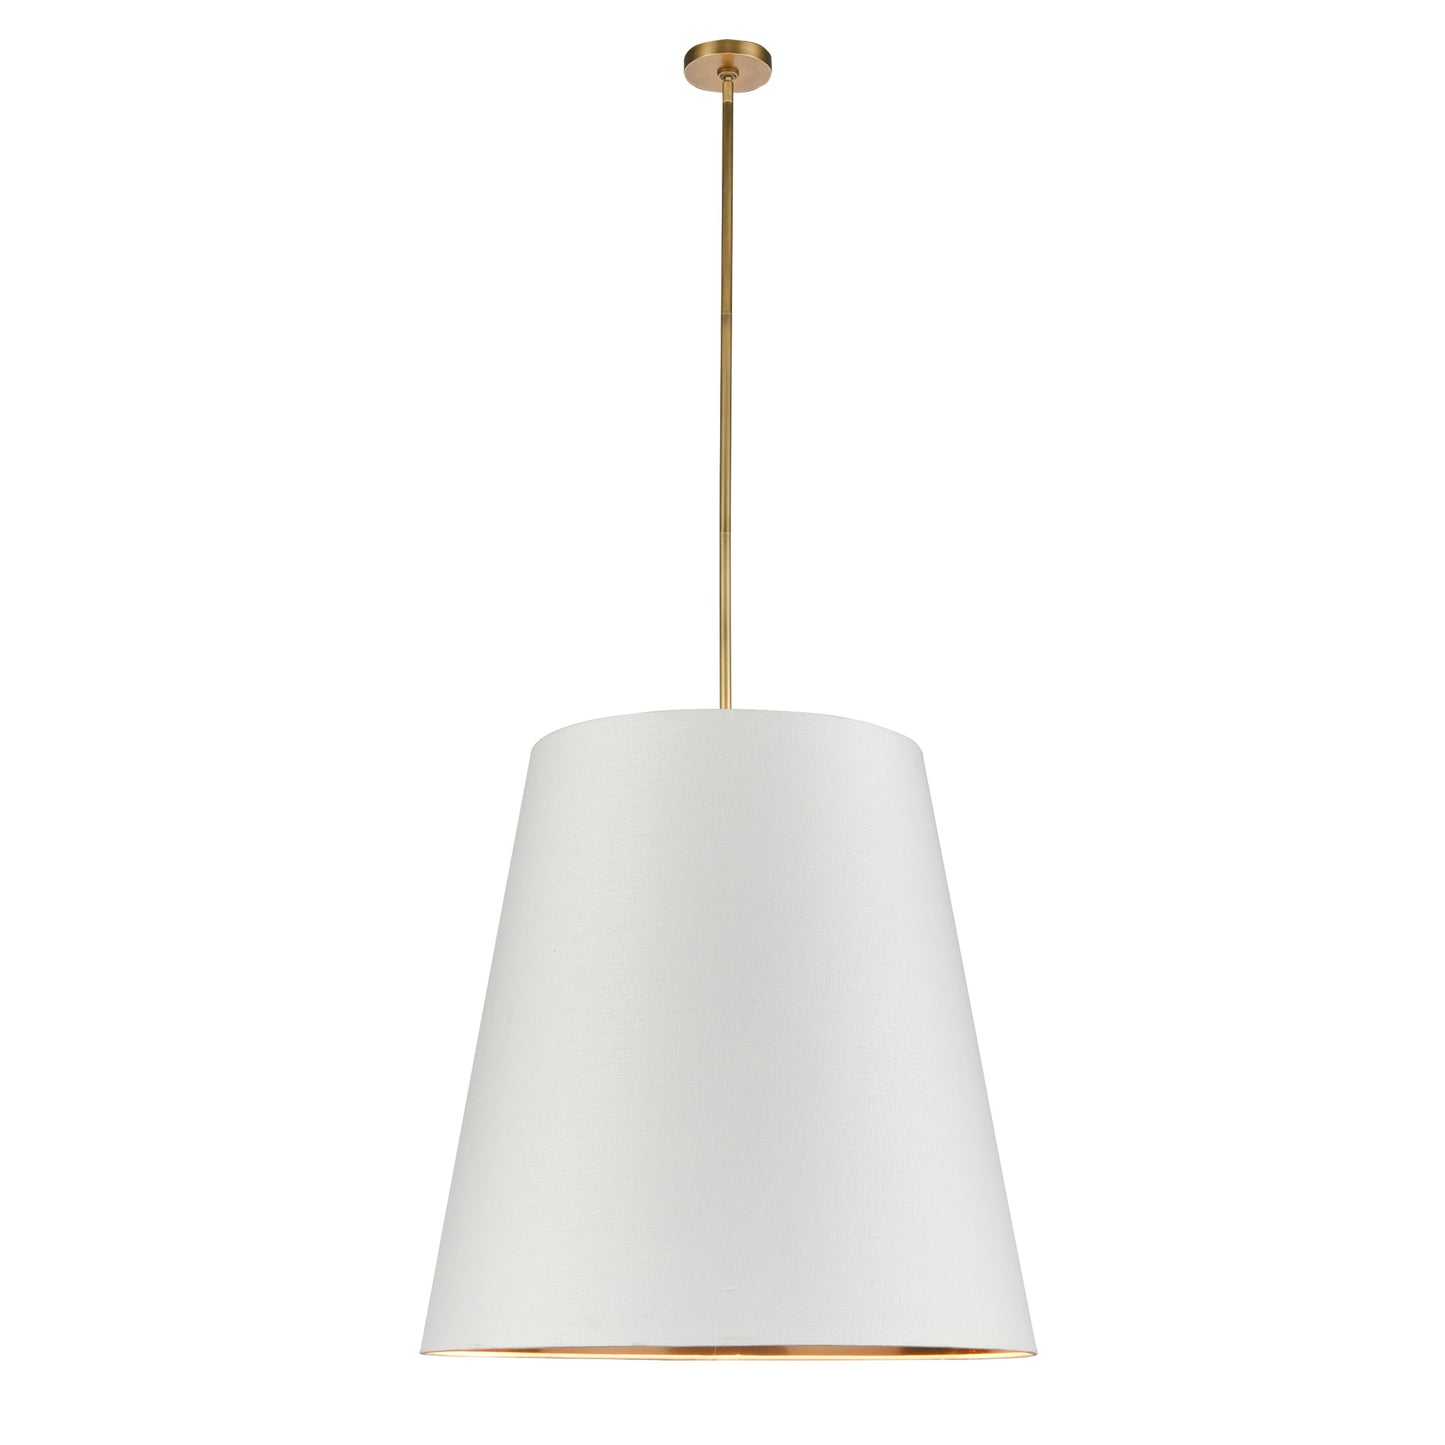 PD311030VBWG Calor 3 Light 30" Vintage Brass With White Linen And Gold Parchment Shade Pendant